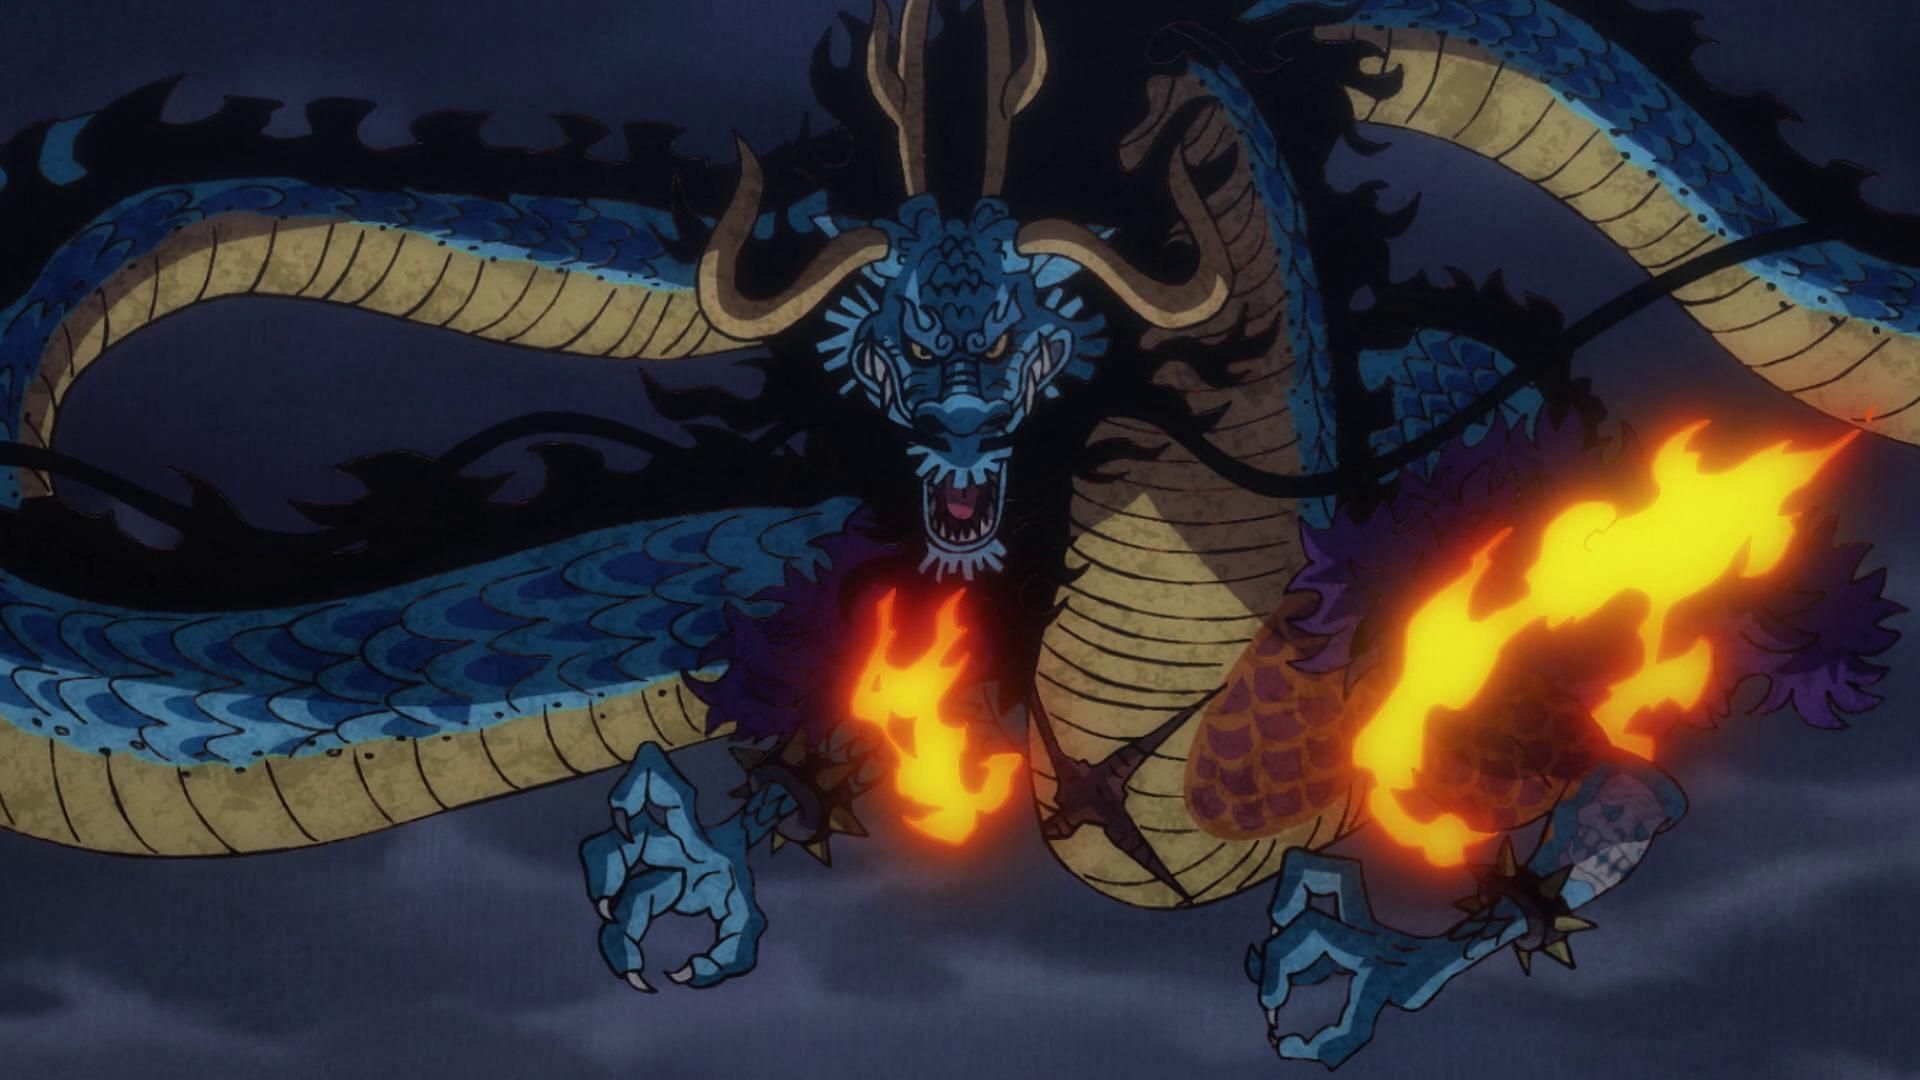 Ivankov almost ate the Mythical Zoan of the Azure Dragon (Image via Toei Animation, One Piece)